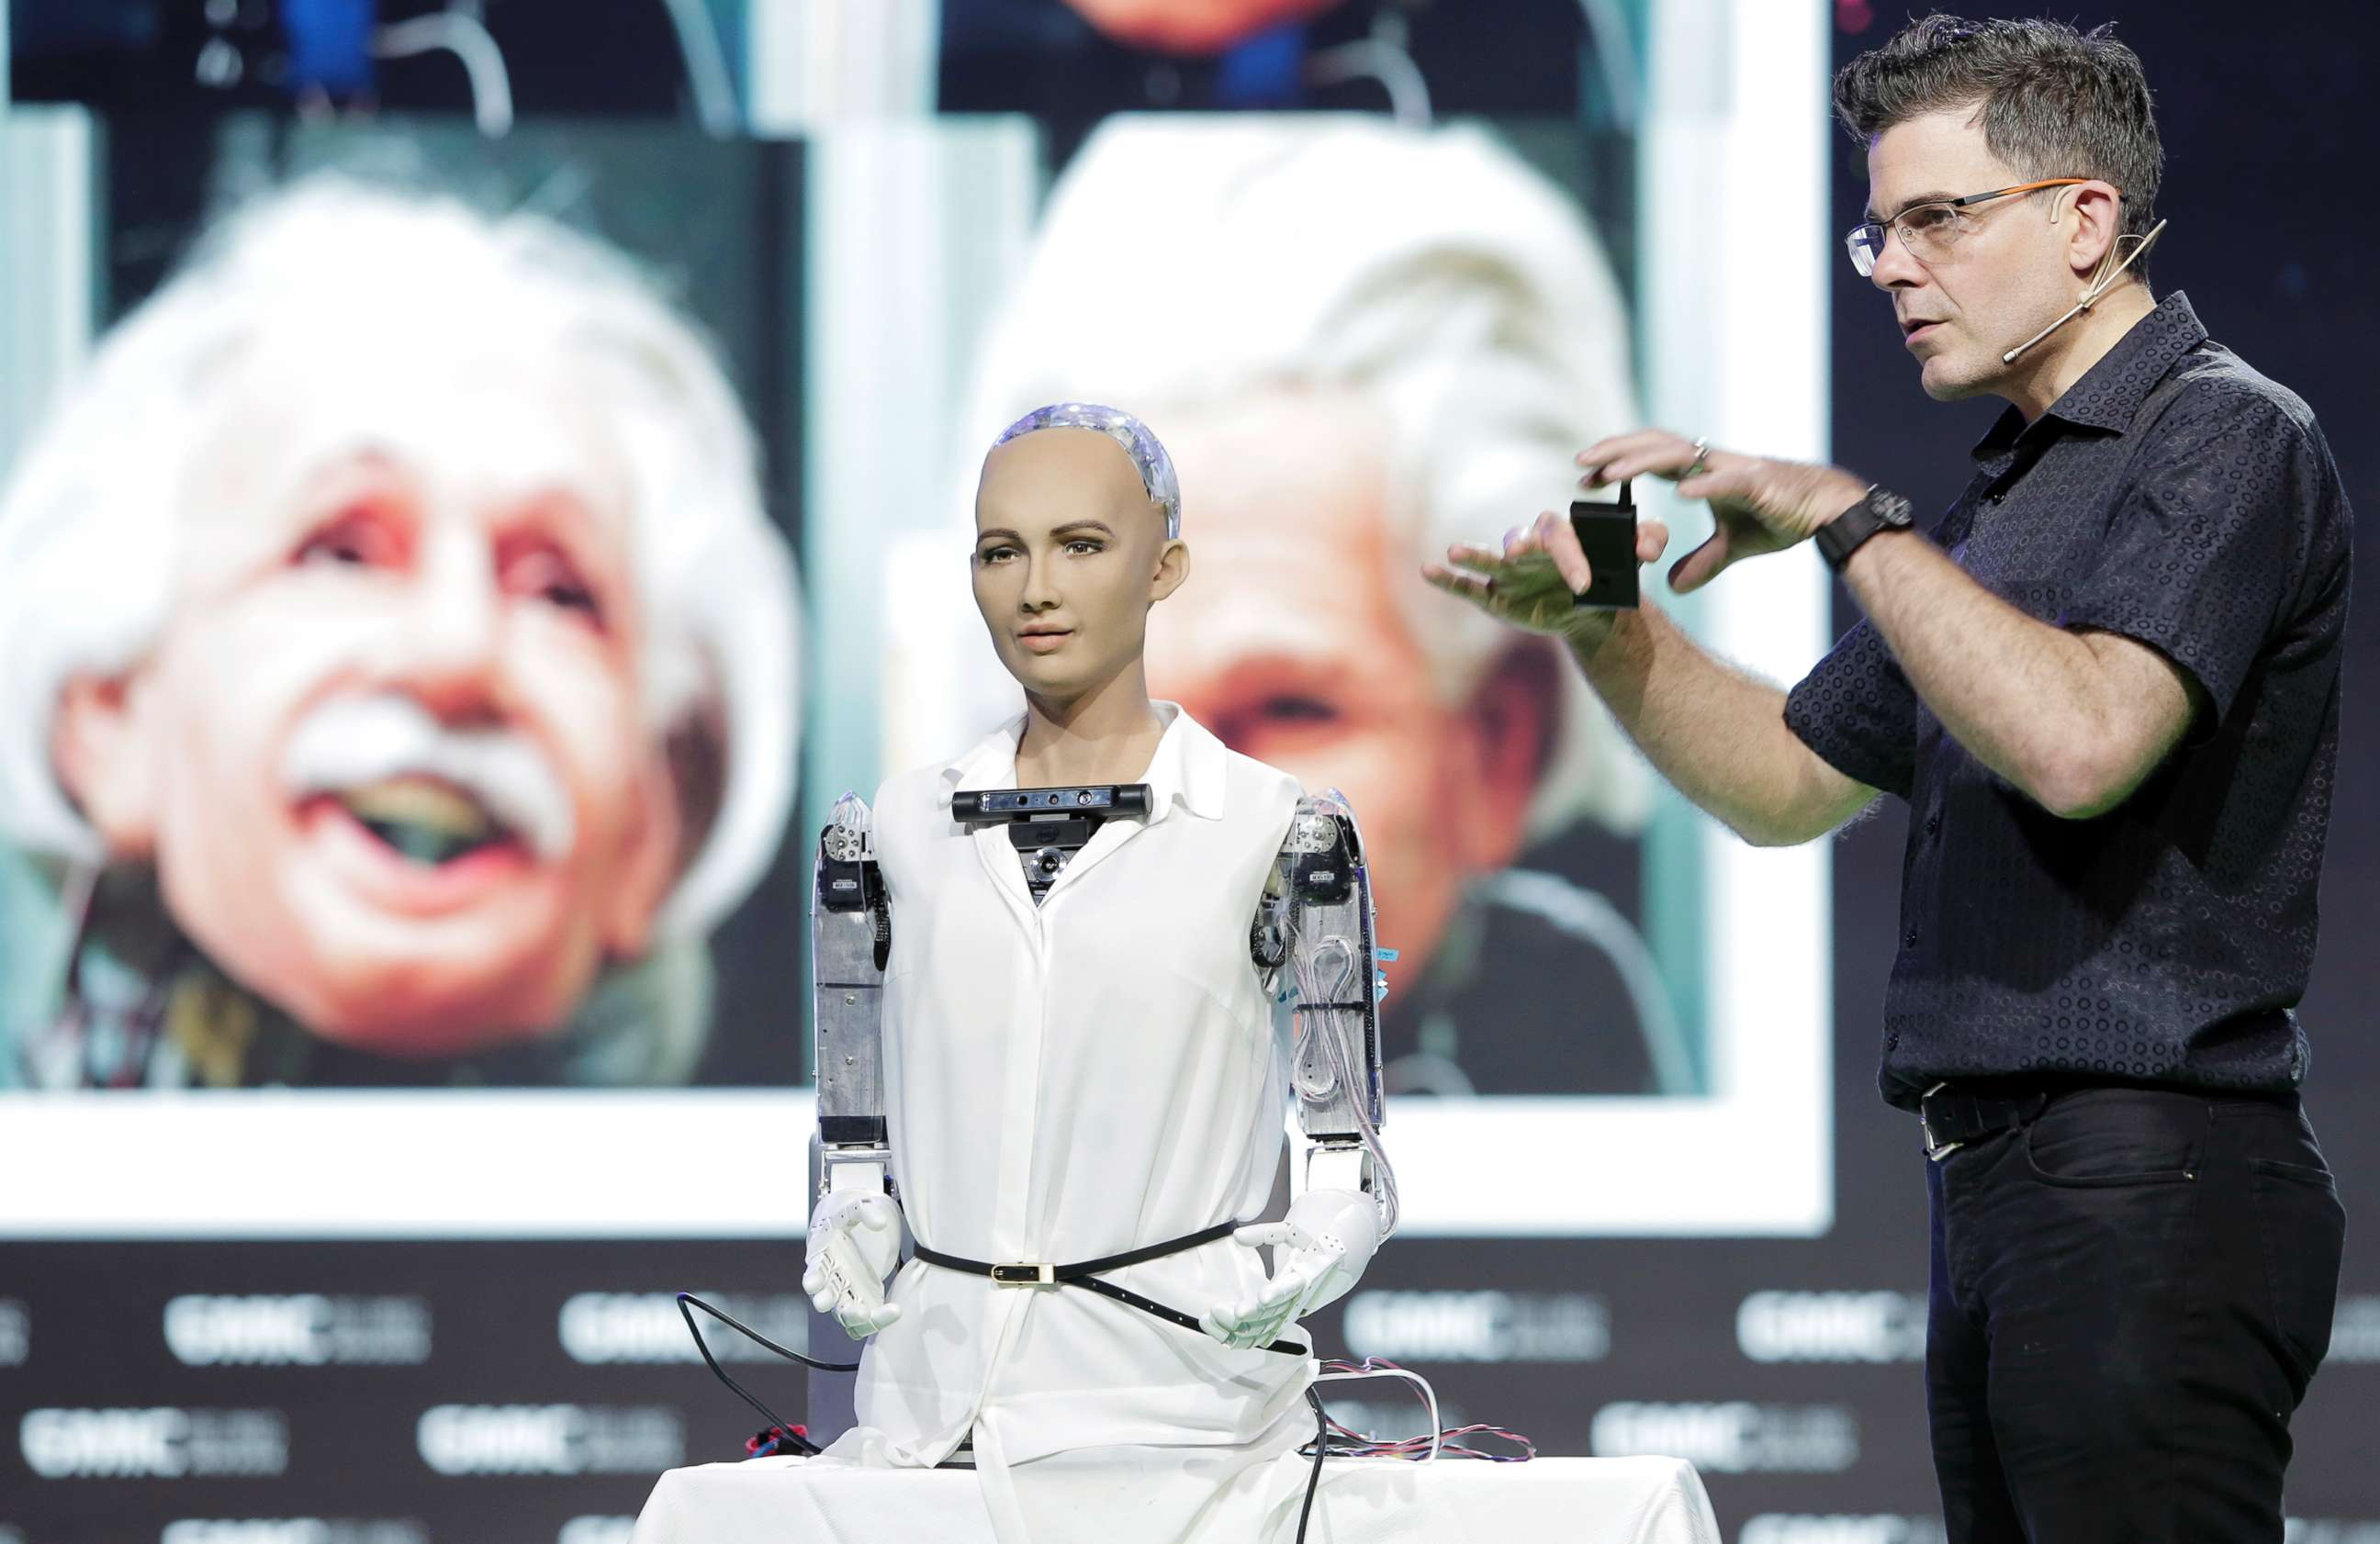 PHOTO: David Hanson, founder and CEO of Hanson Robotics,  introduces the process of creating Robot Sophia, an ultra-realistic female humanoid robot, during the 2016 Global Mobile Internet Conference on April 29, 2016, in Beijing.